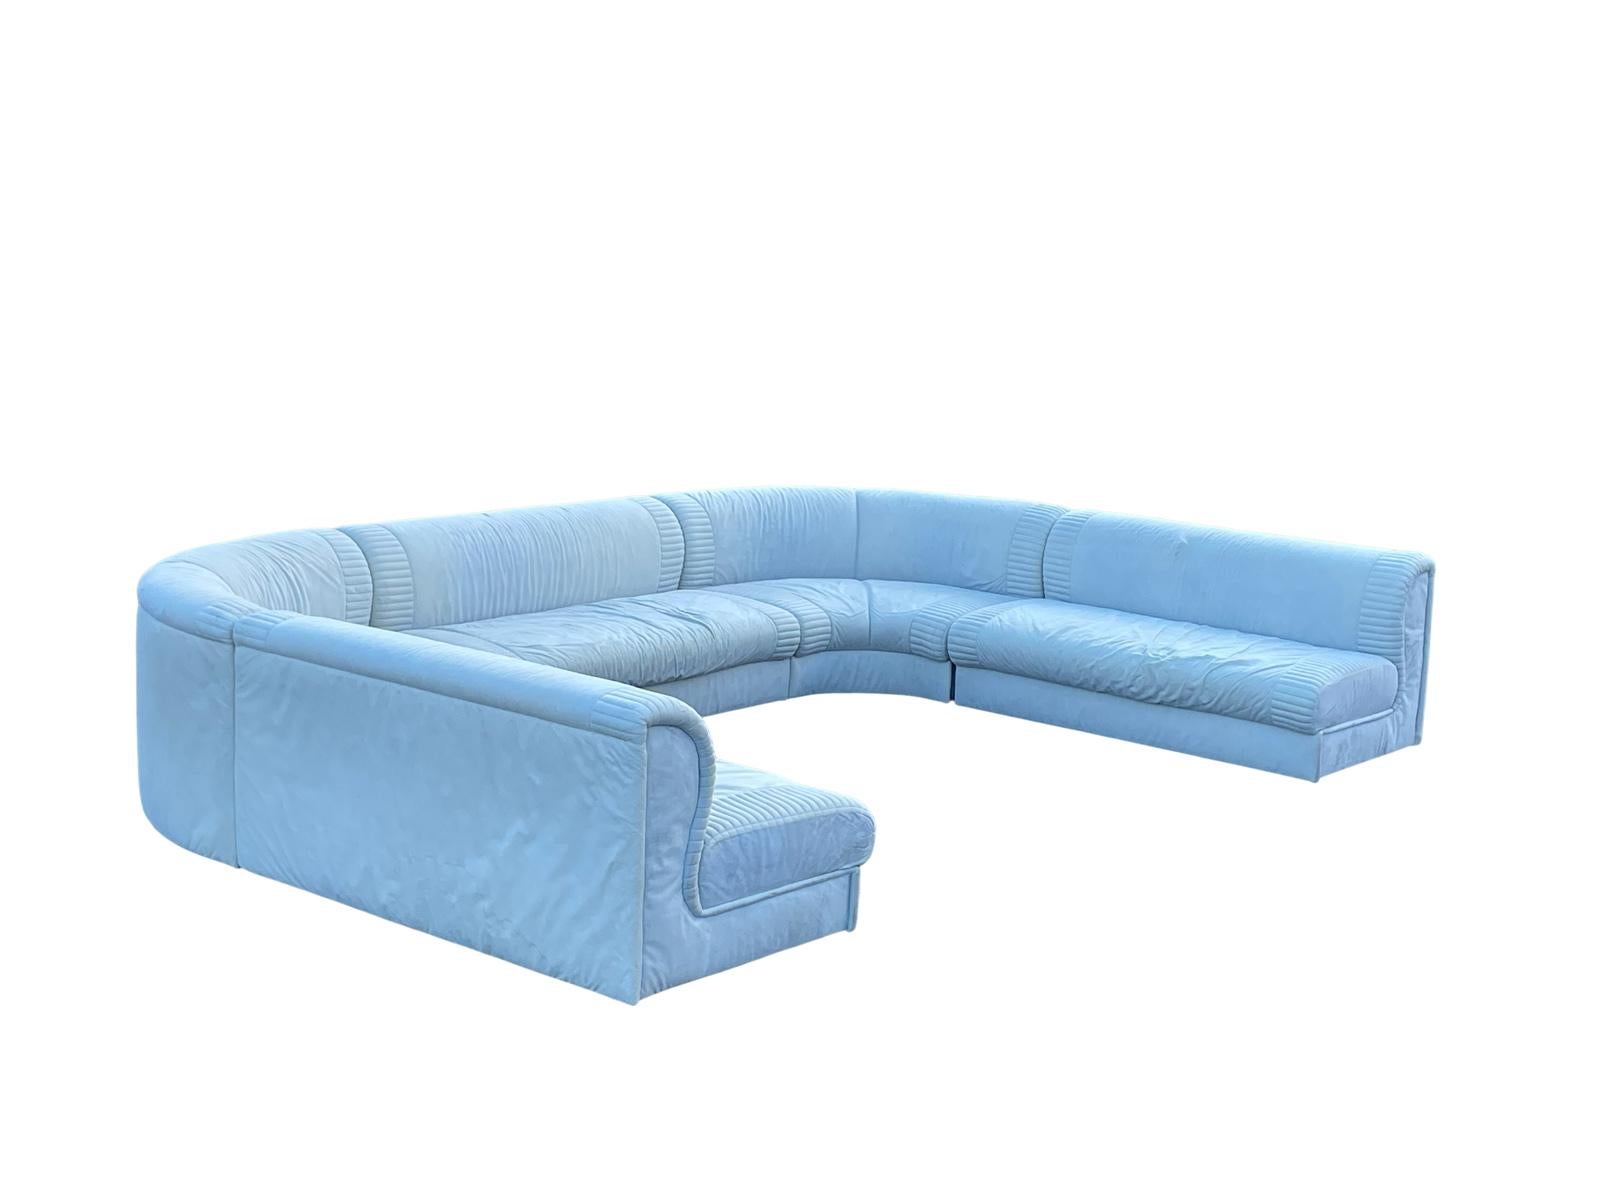 American Weiman 1980s U-Shaped Sectional Pit Sofa  For Sale